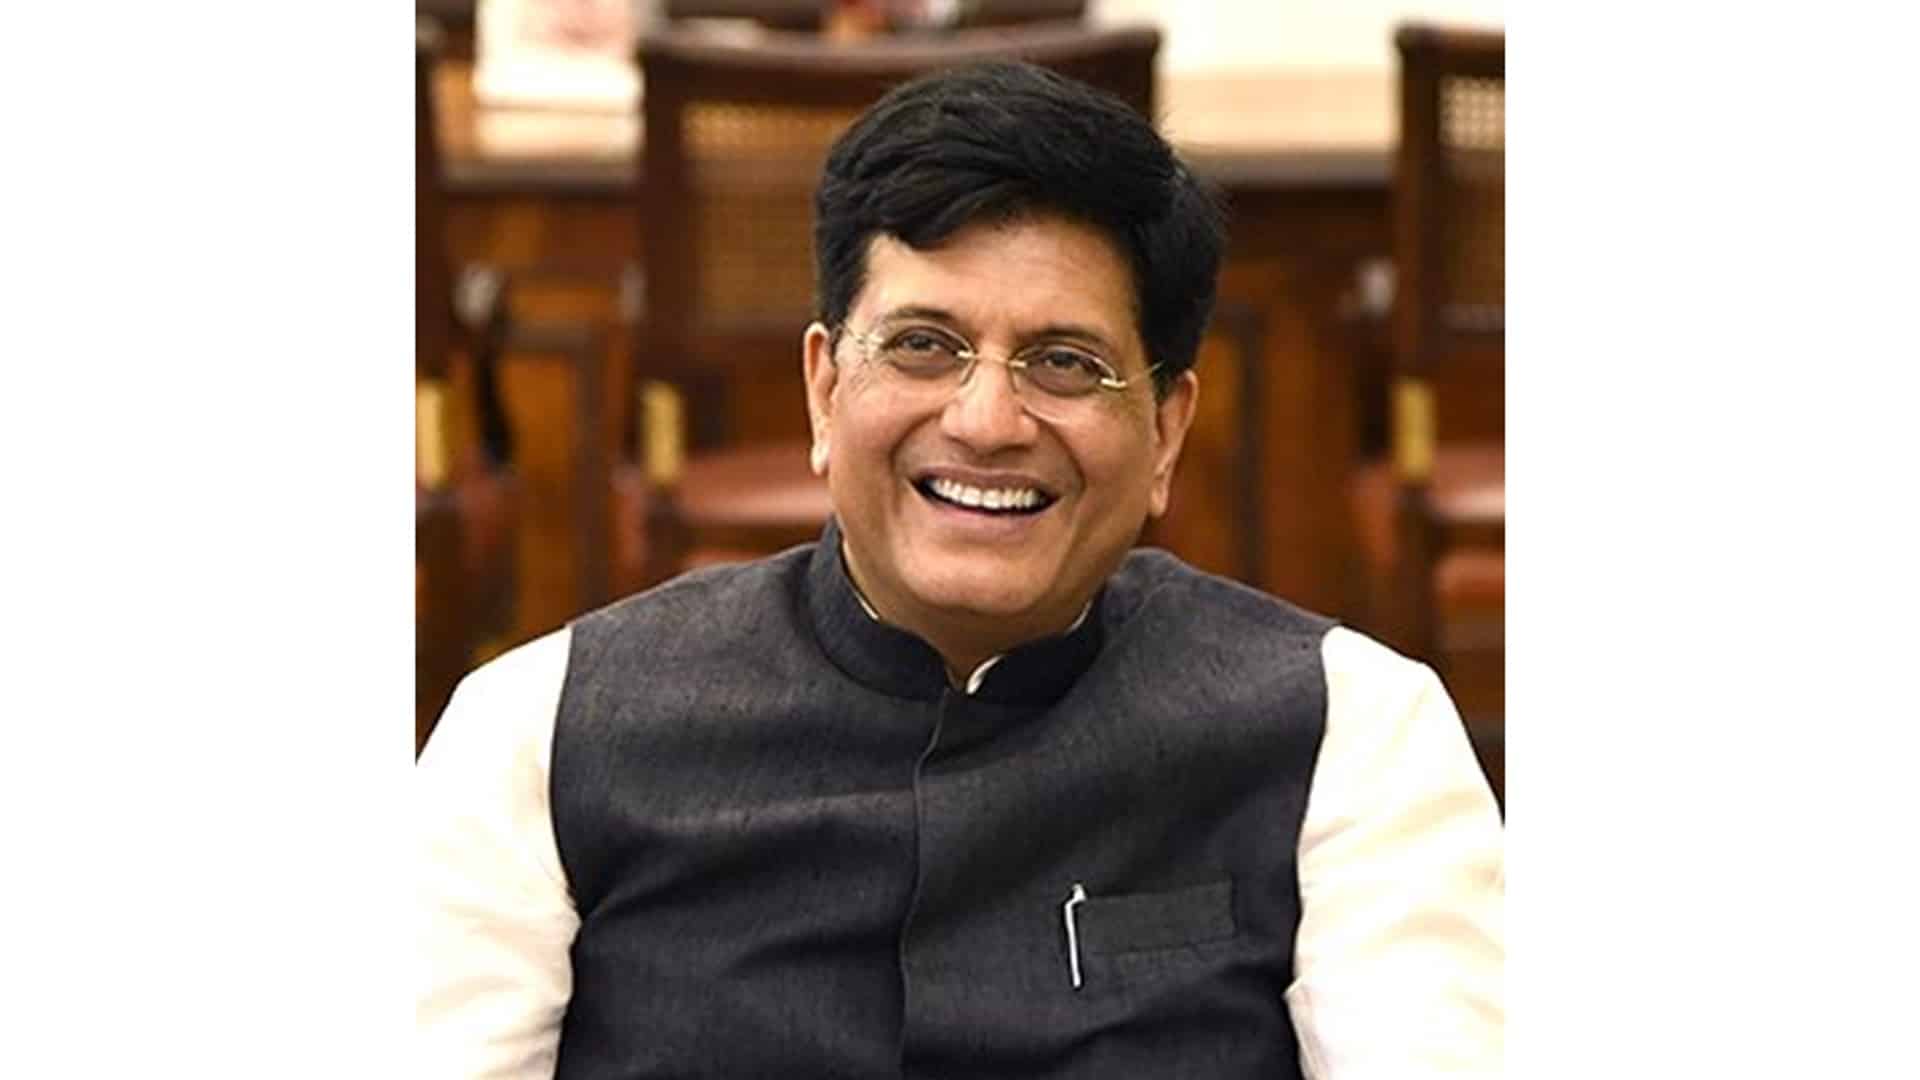 Linking of WTO reforms by developed countries with S&DT unfair: Goyal